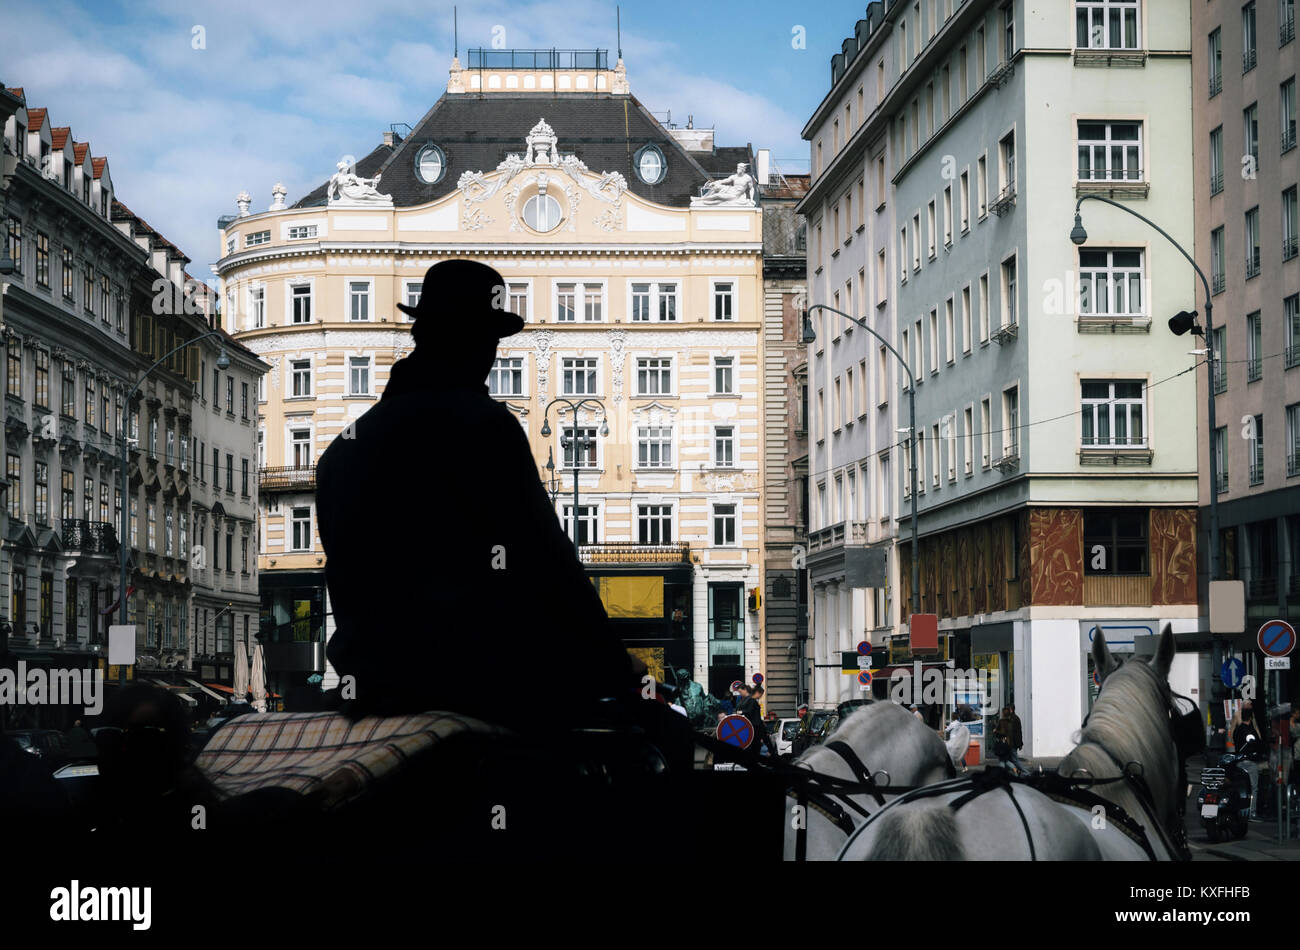 Horse-drawn carriage fiaker with silhouette of coachman as tourist guide walking along the ancient streets of Vienna, Austria Stock Photo